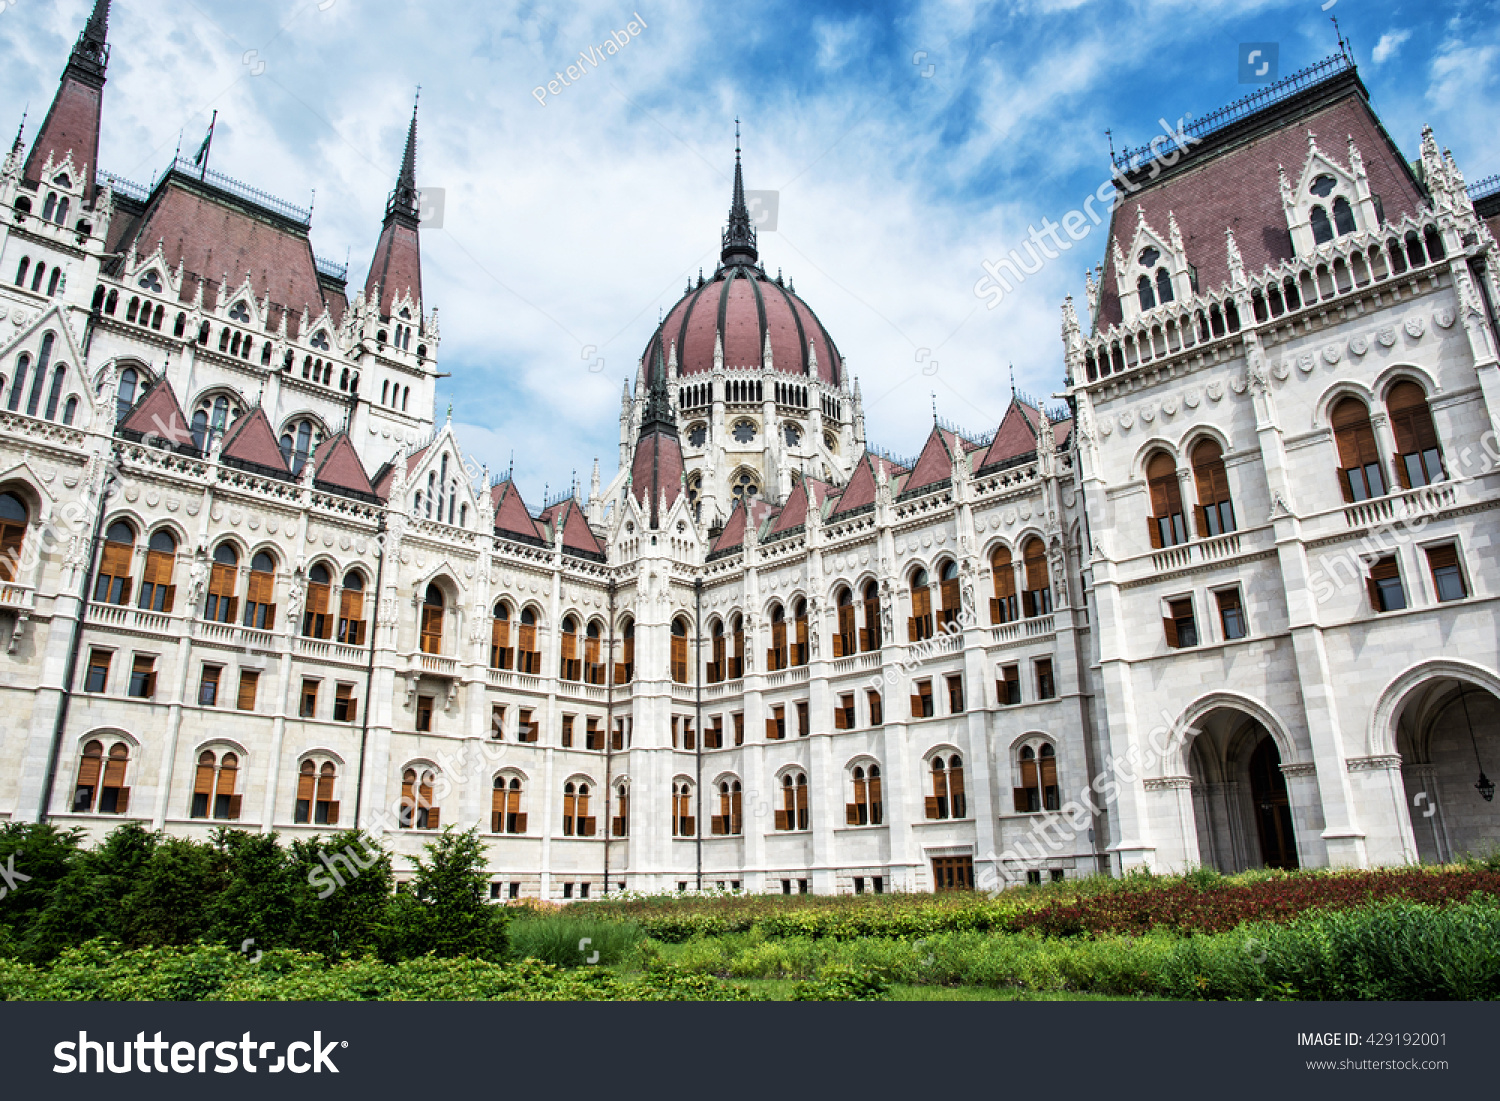 Hungarian parliament building - Orszaghaz, also known as the Parliament of Budapest, Hungary. House of the nation. Cultural heritage. Travel destination. Architectural theme. Lajos Kossuth square. #429192001